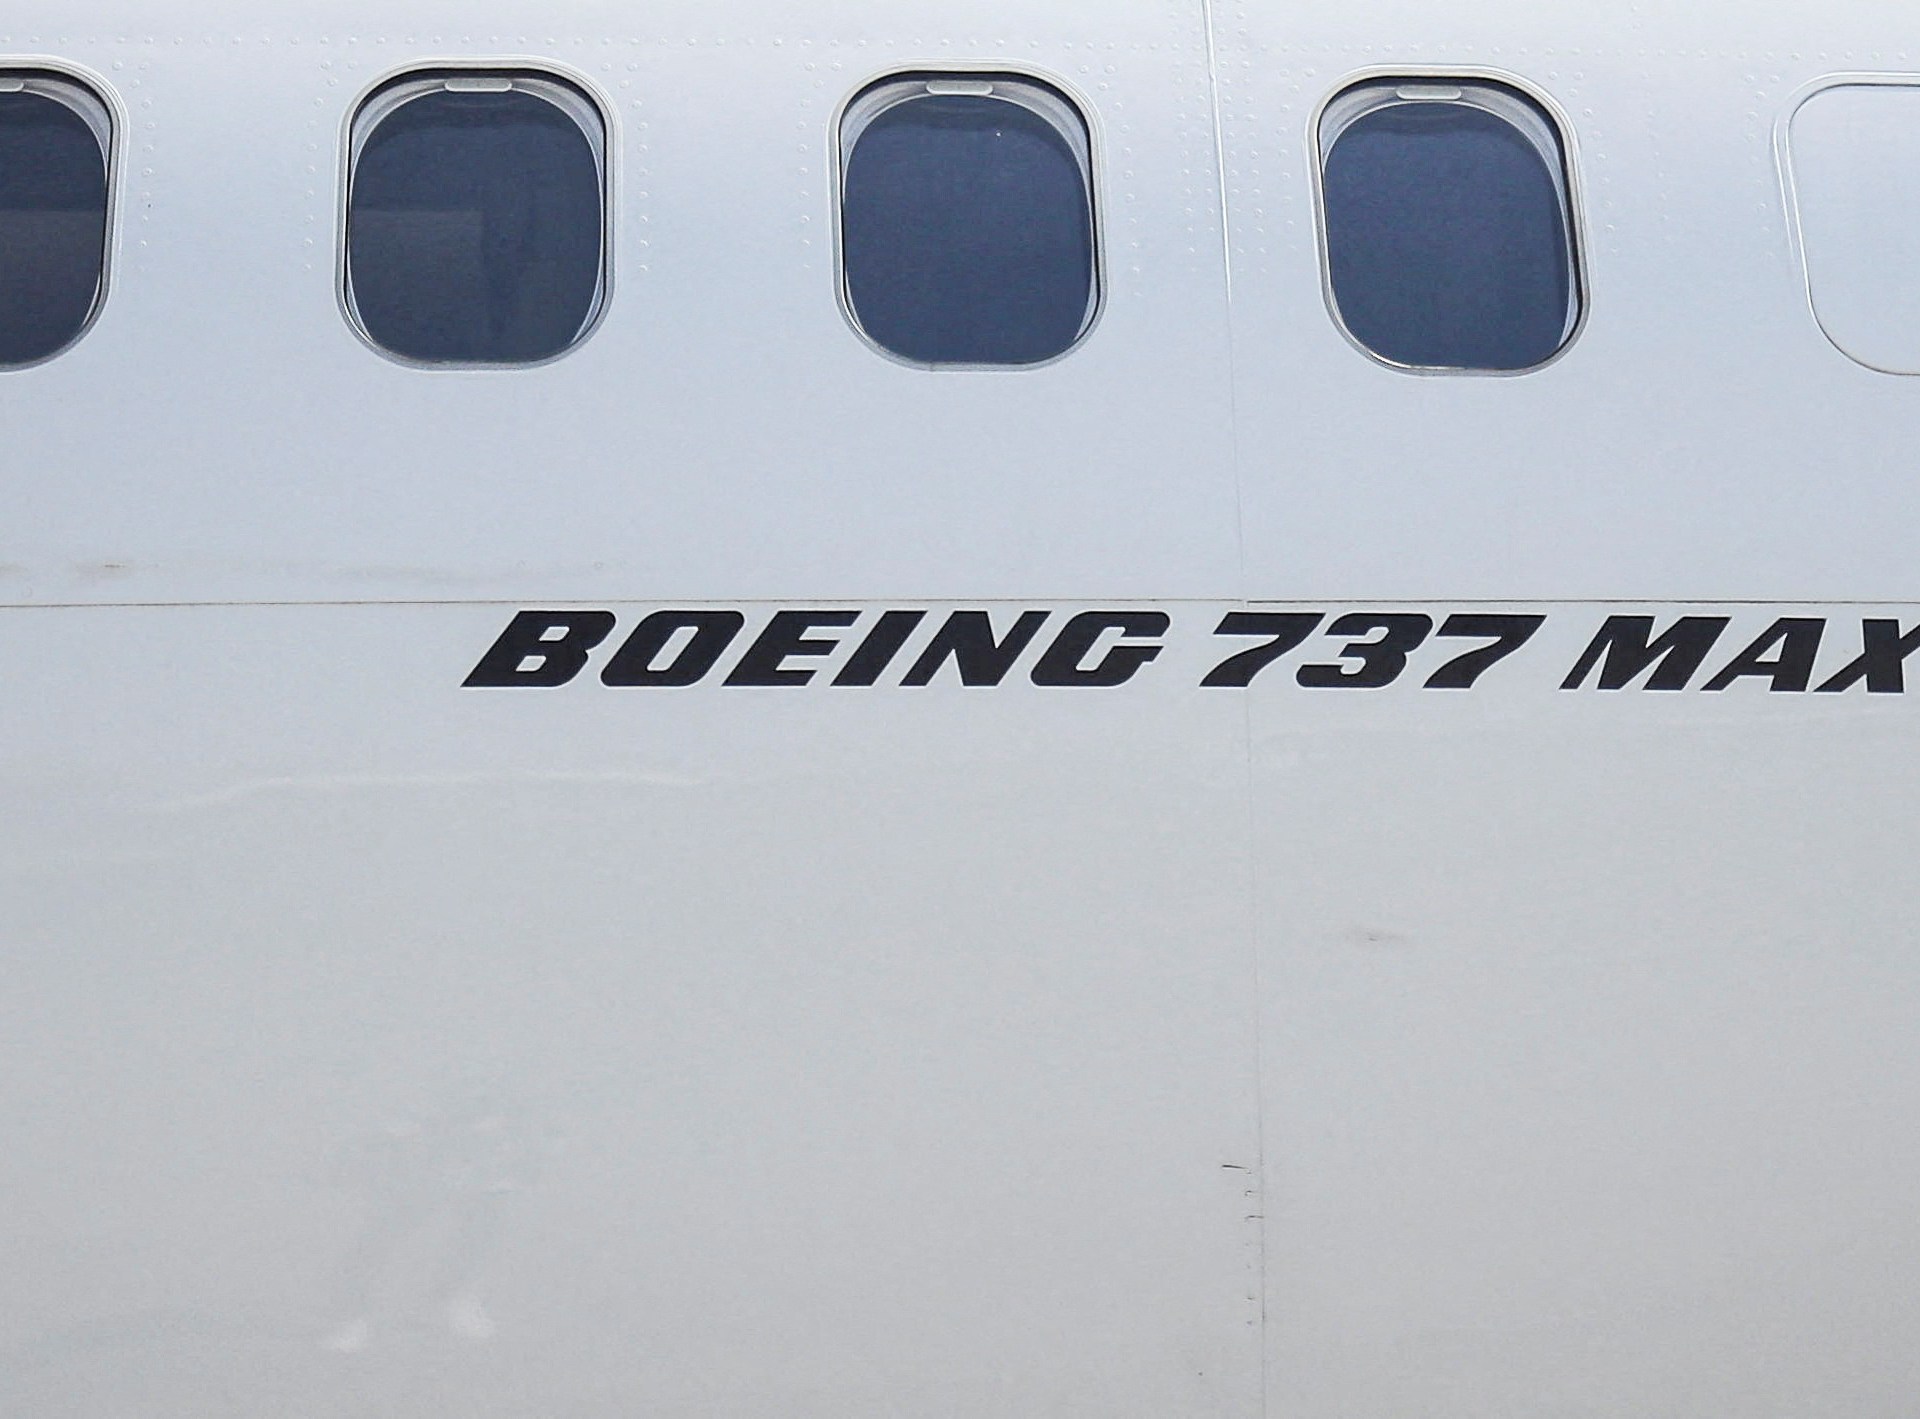 Despite lawsuits, monopoly may keep Boeing’s business intact | Aviation News